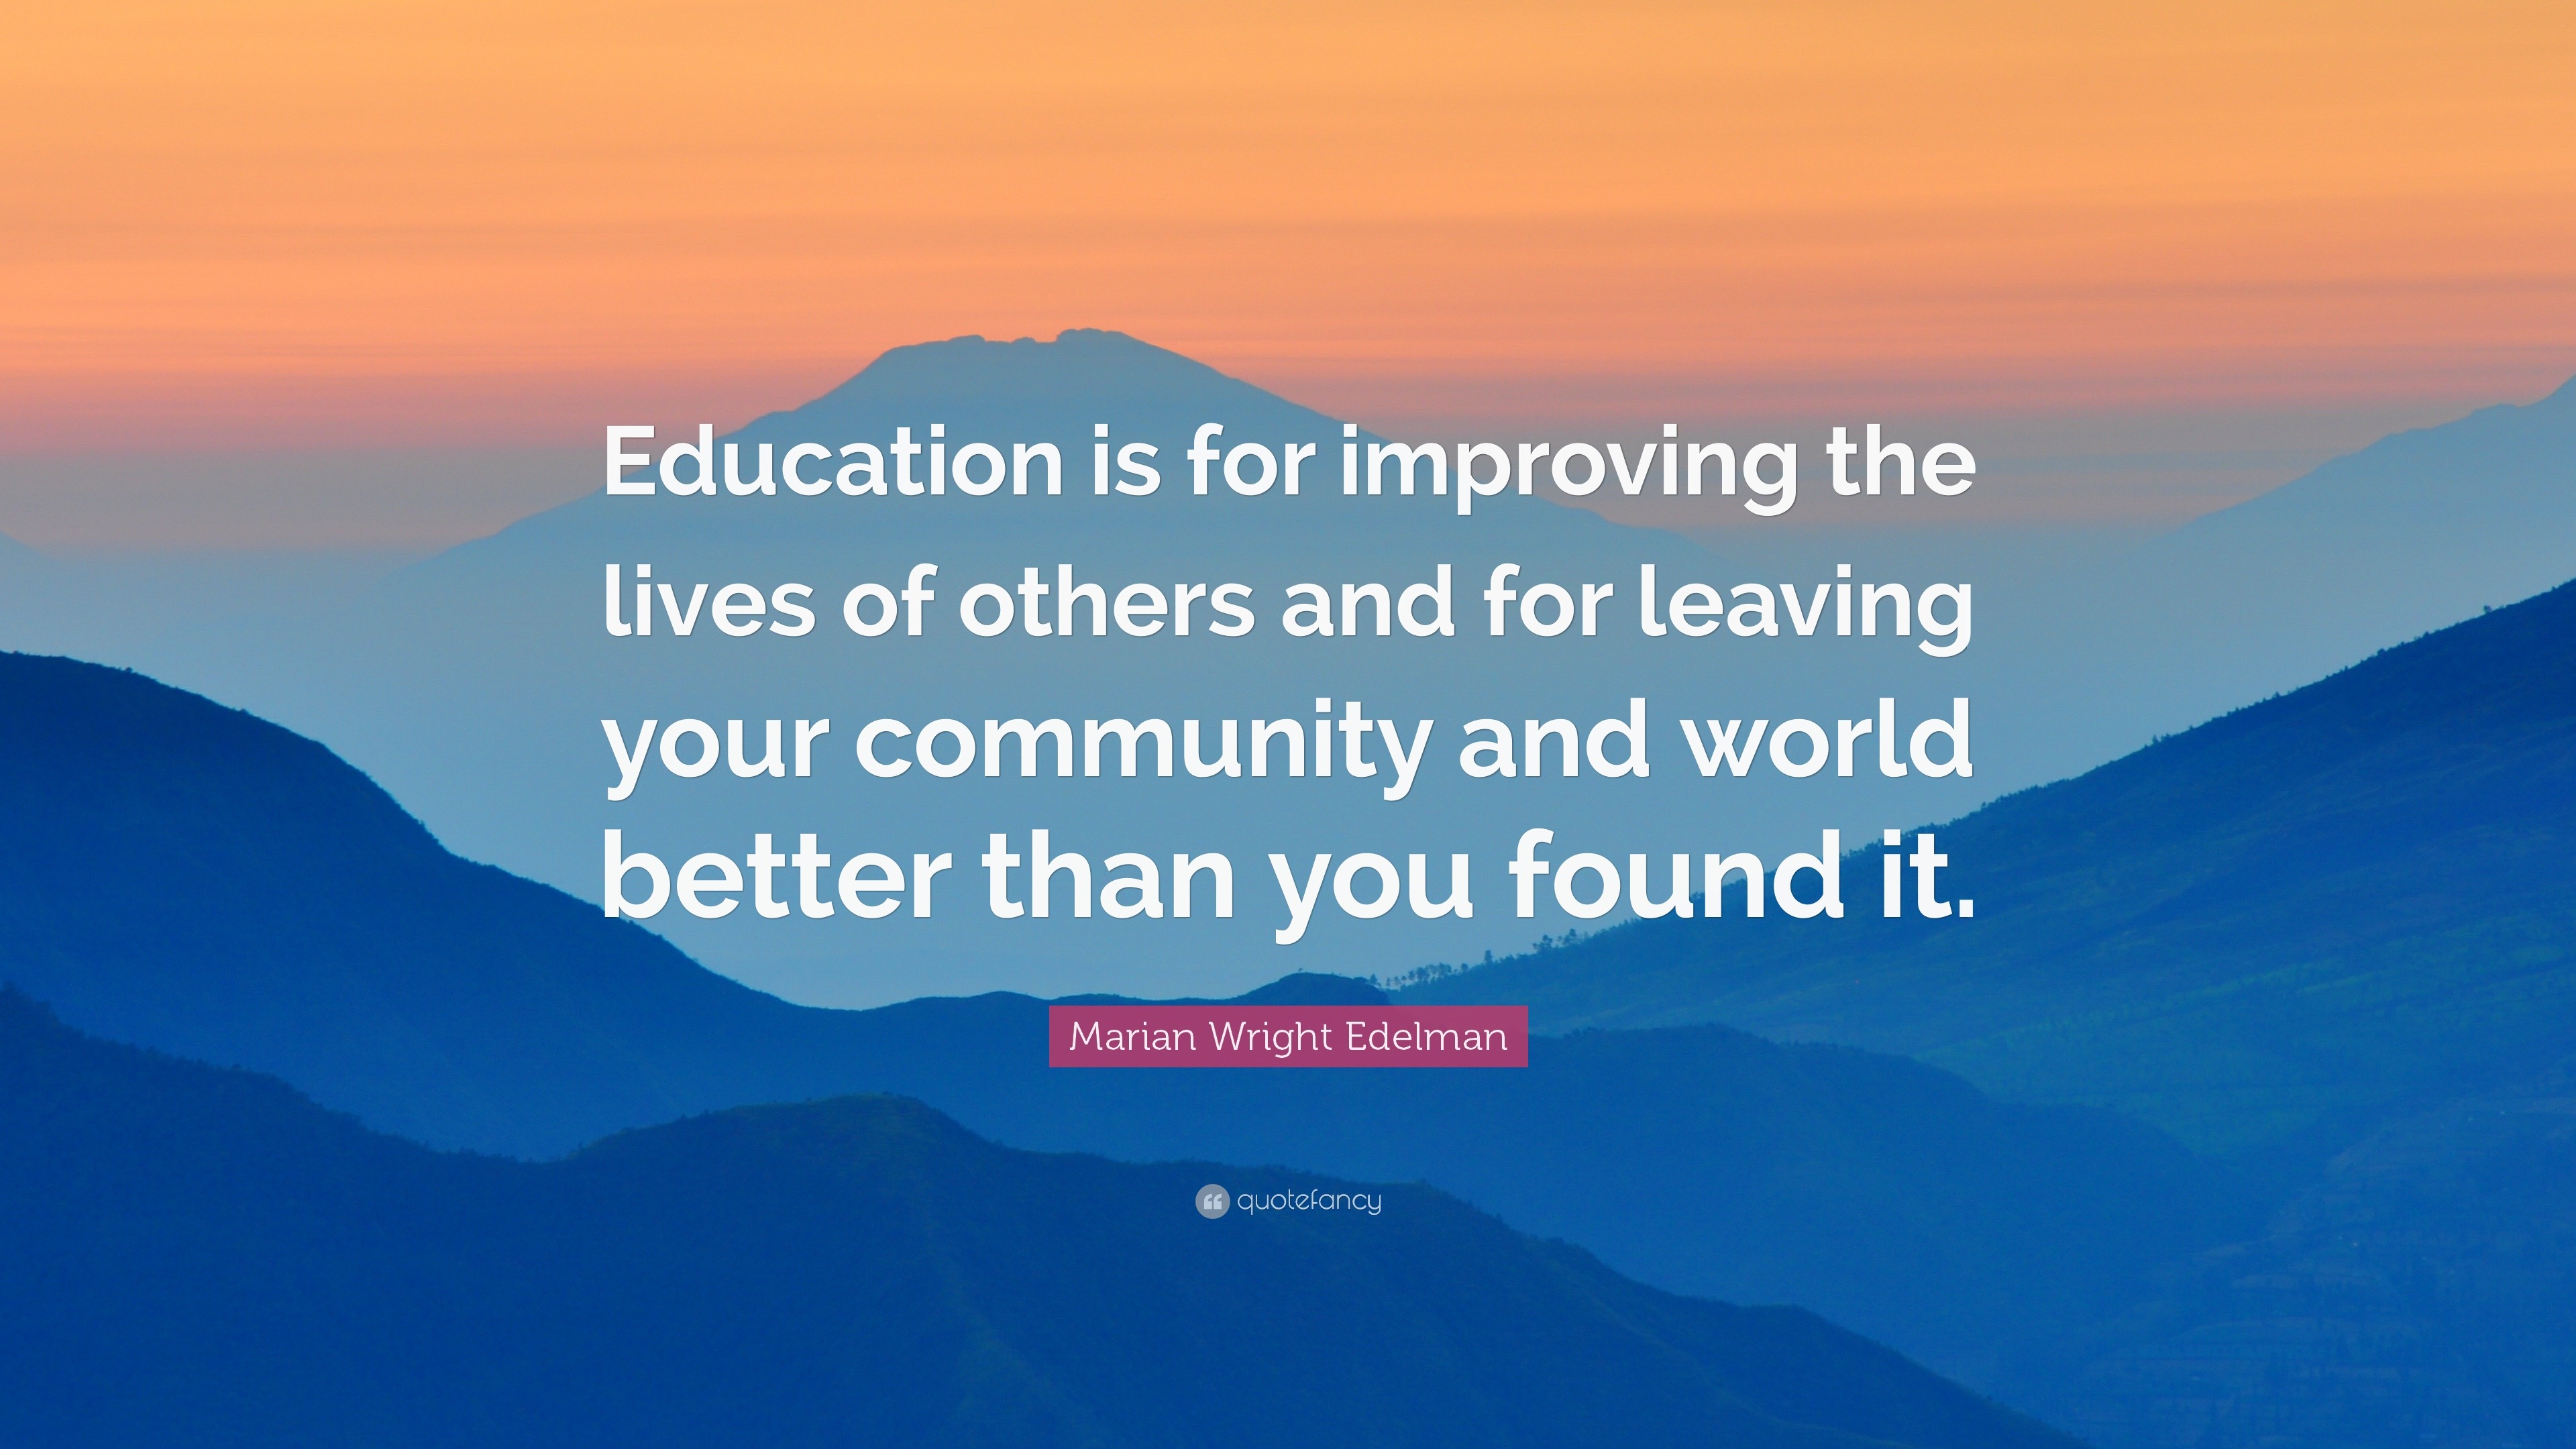 Best Collection Of 100 Inspiring Education Quotes For - vrogue.co